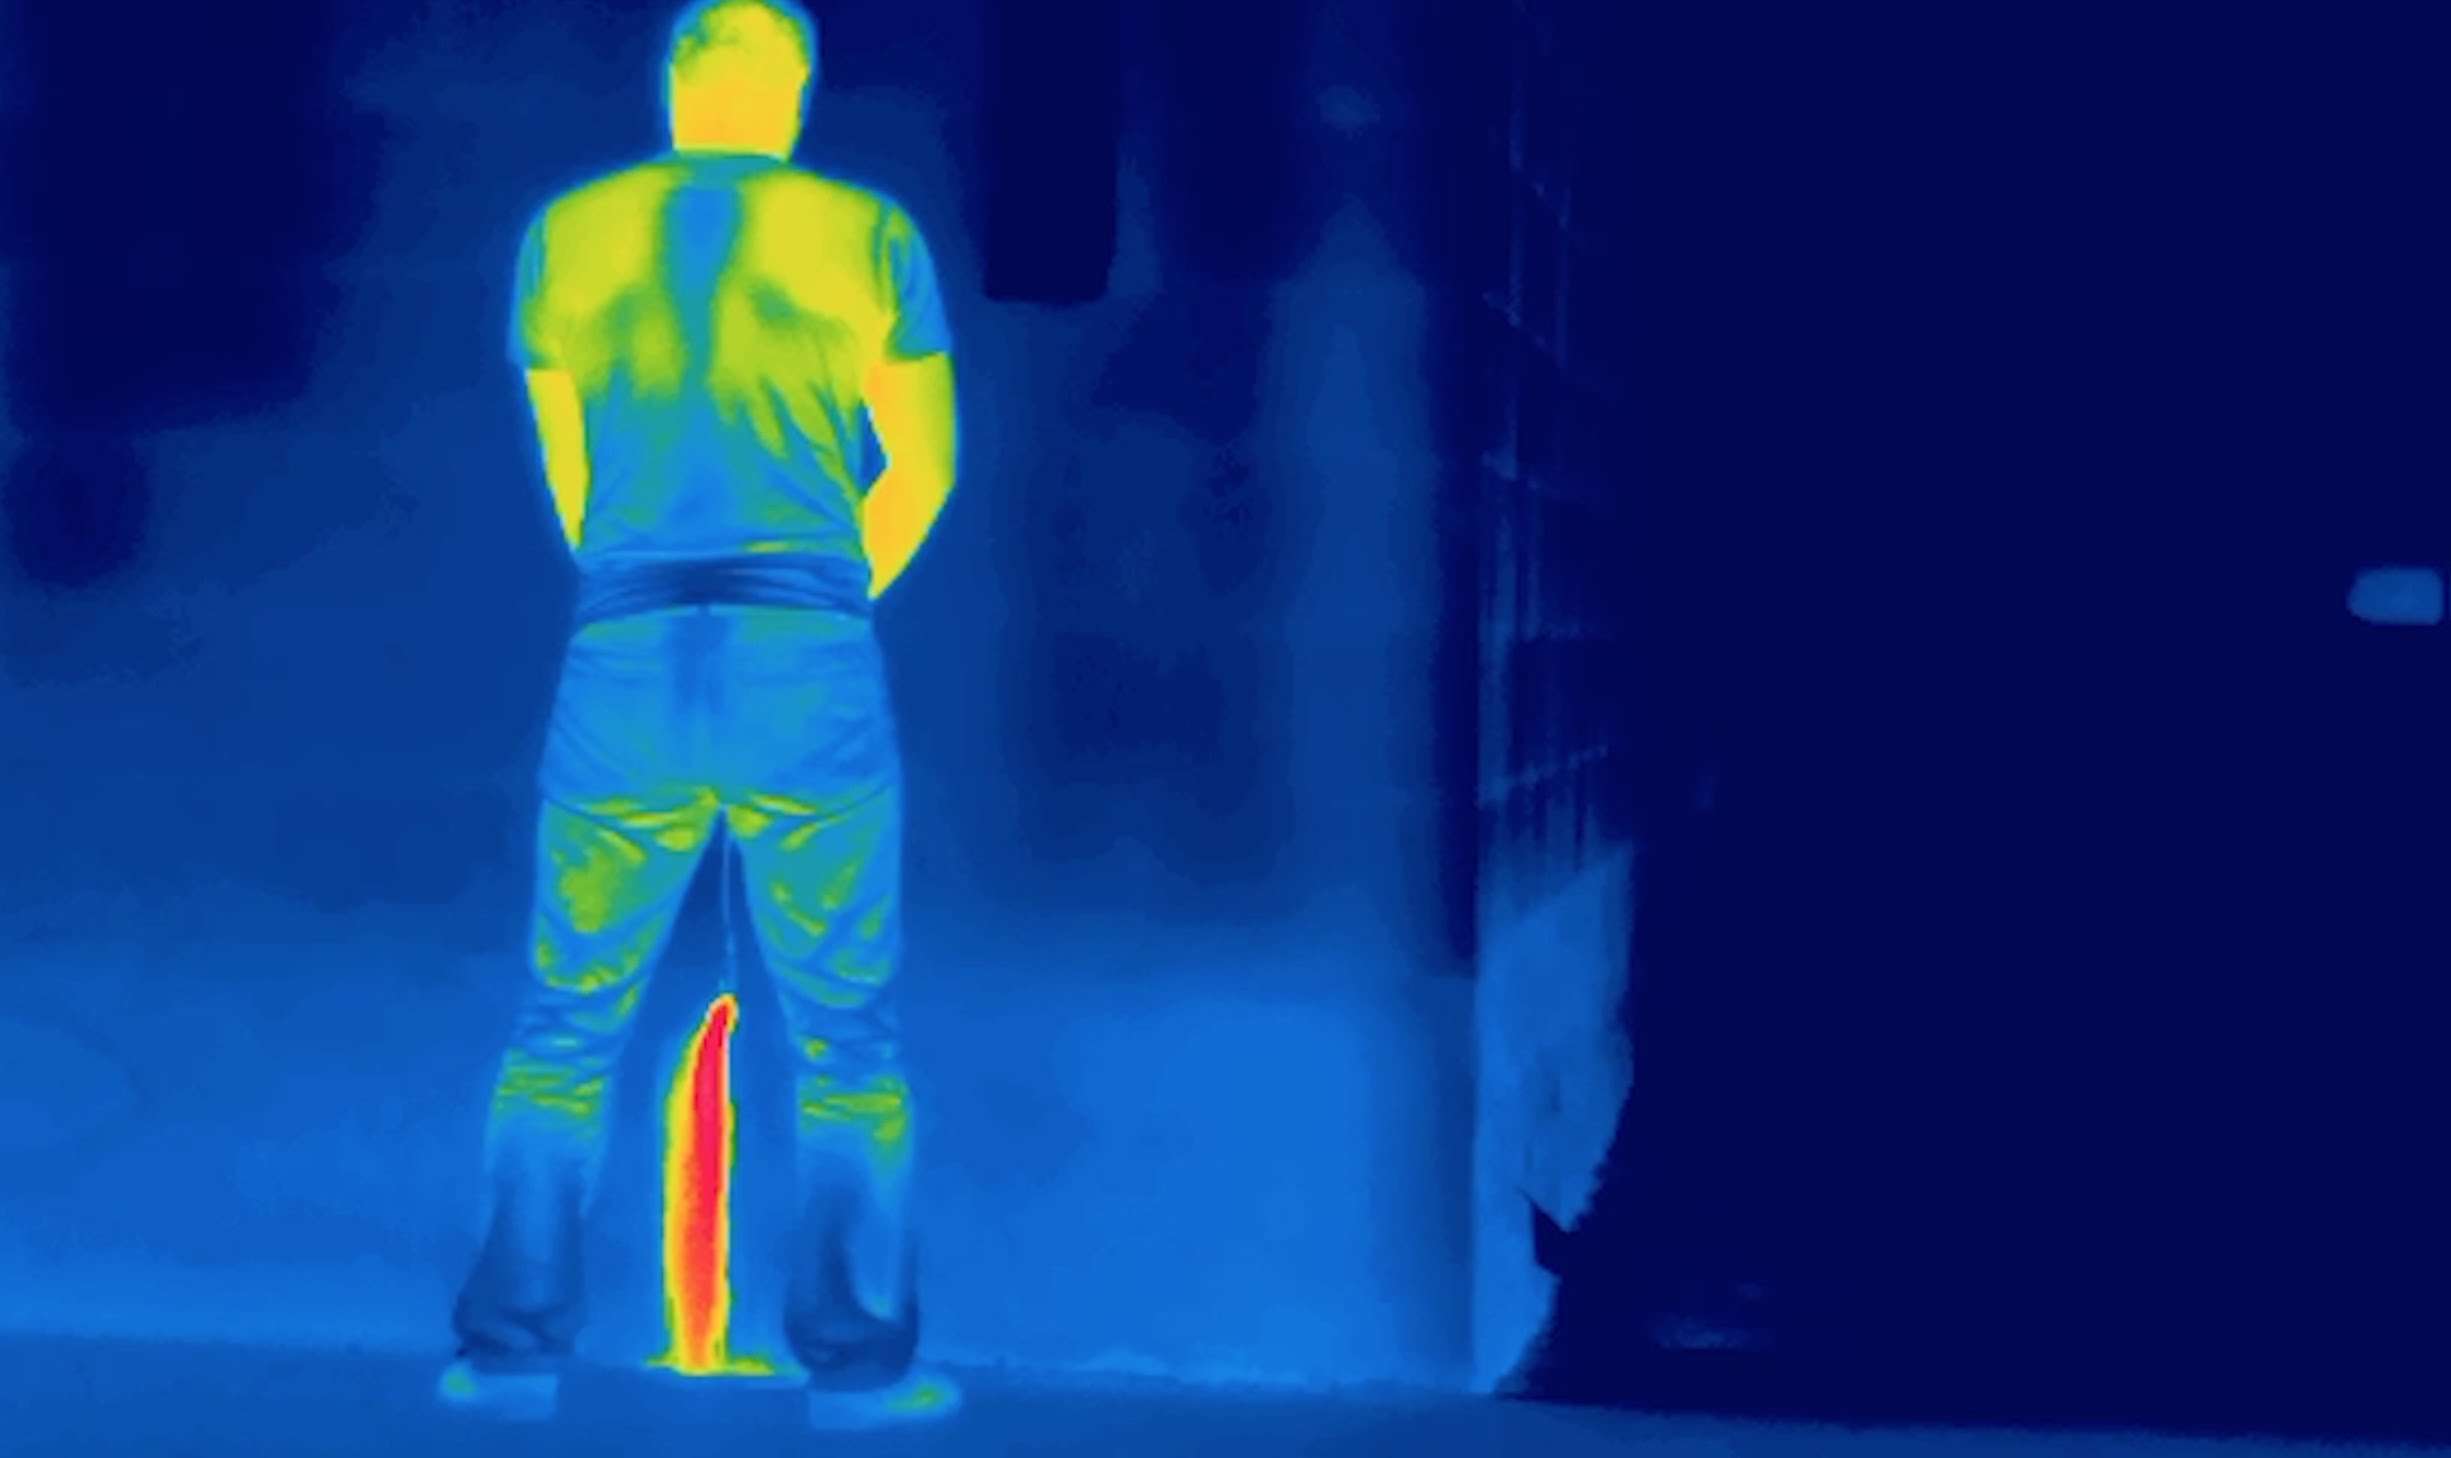 What Your Life Looks Like In Thermal.